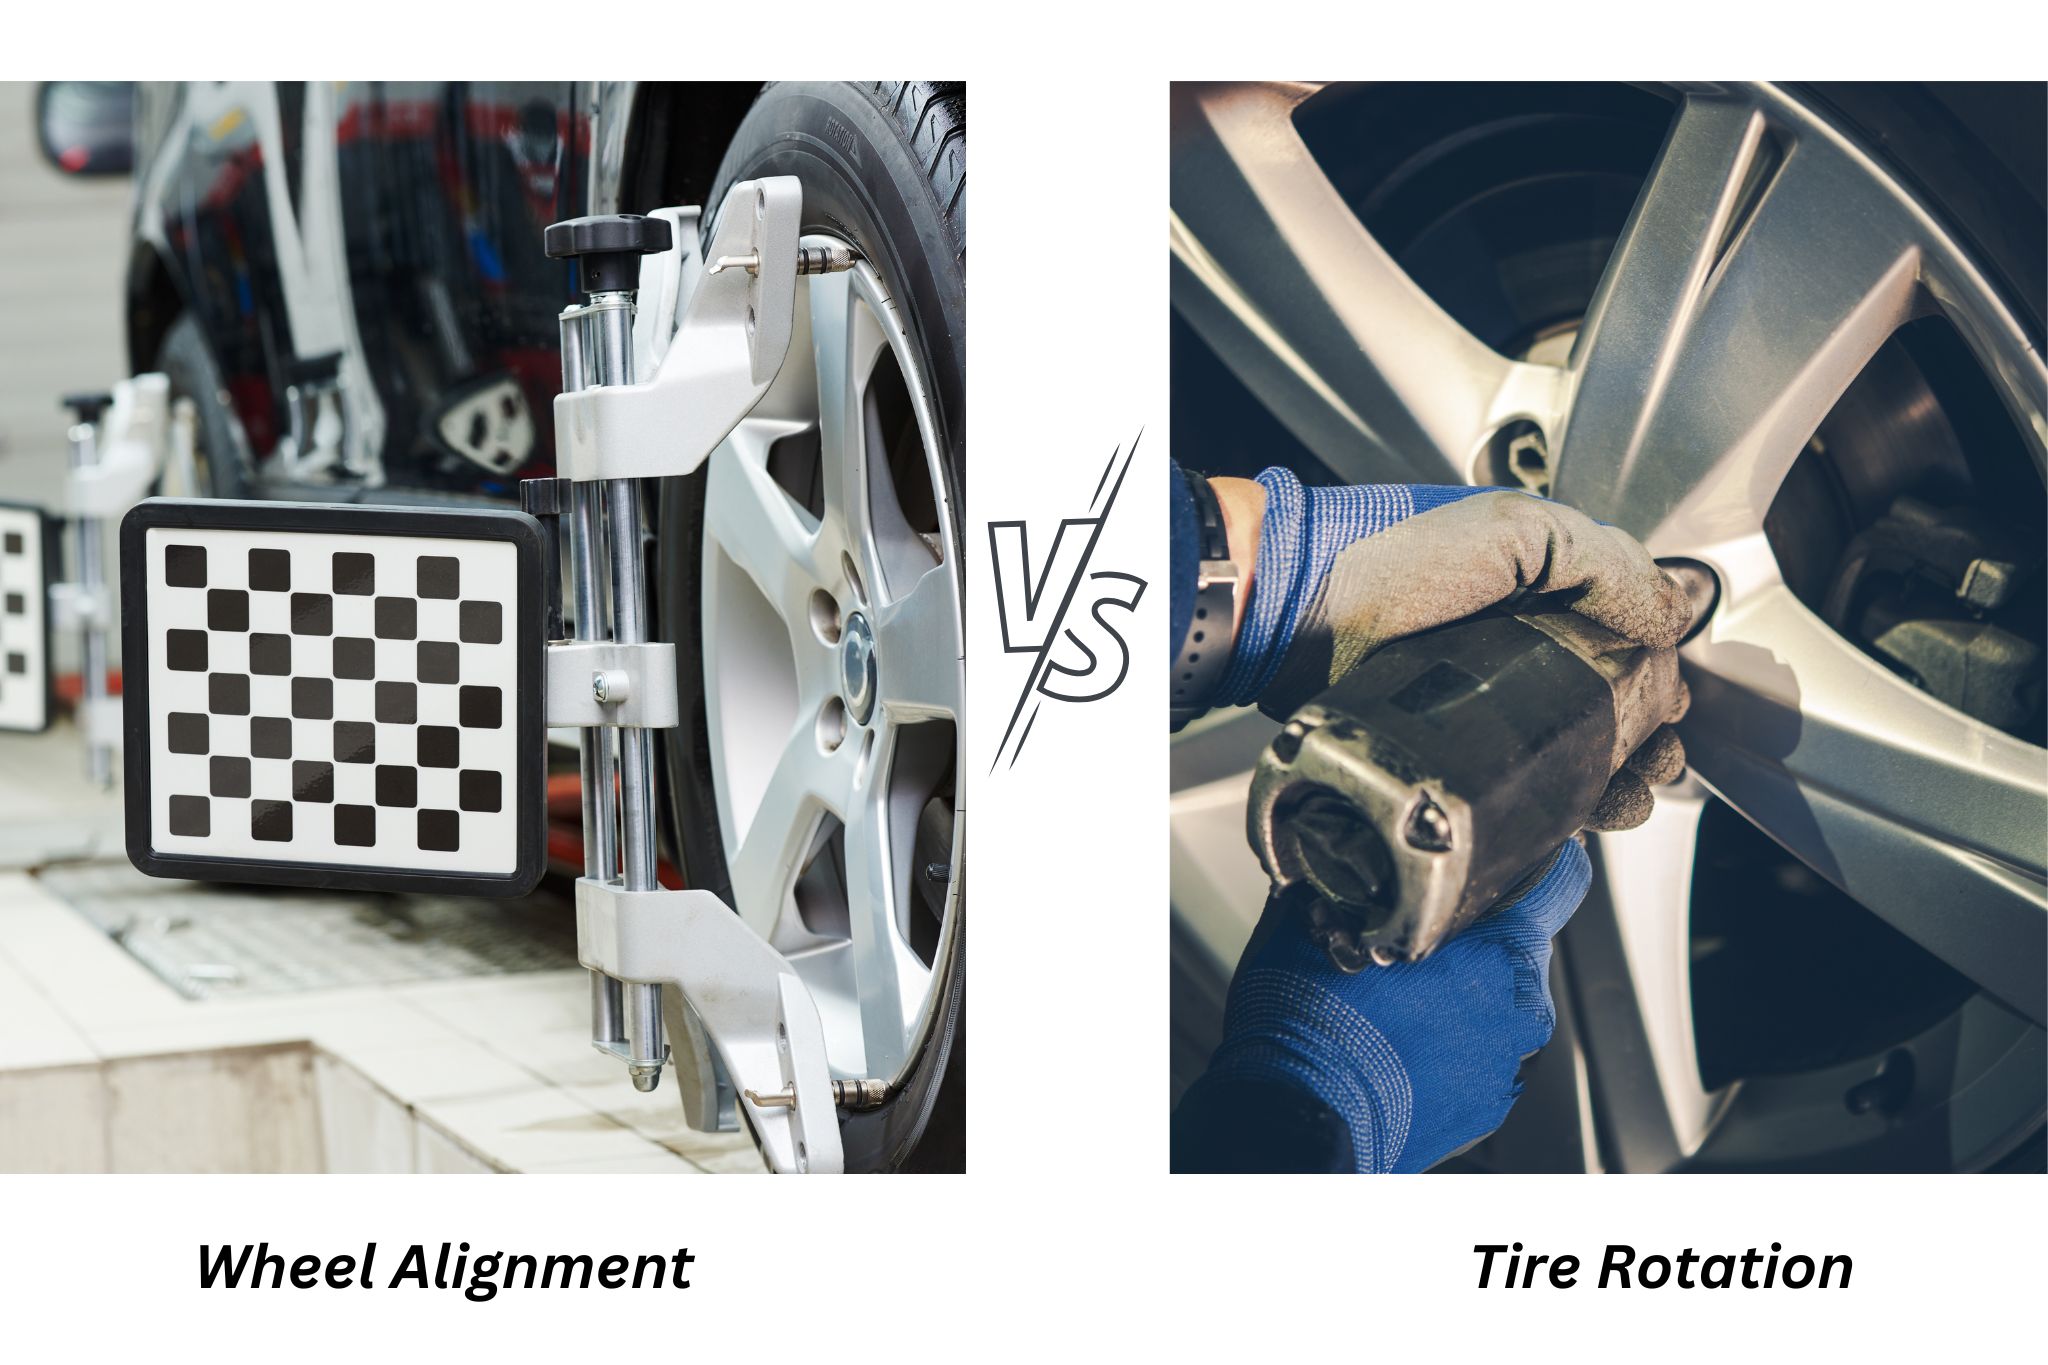 Is Wheel Alignment and Tire Rotation The Same